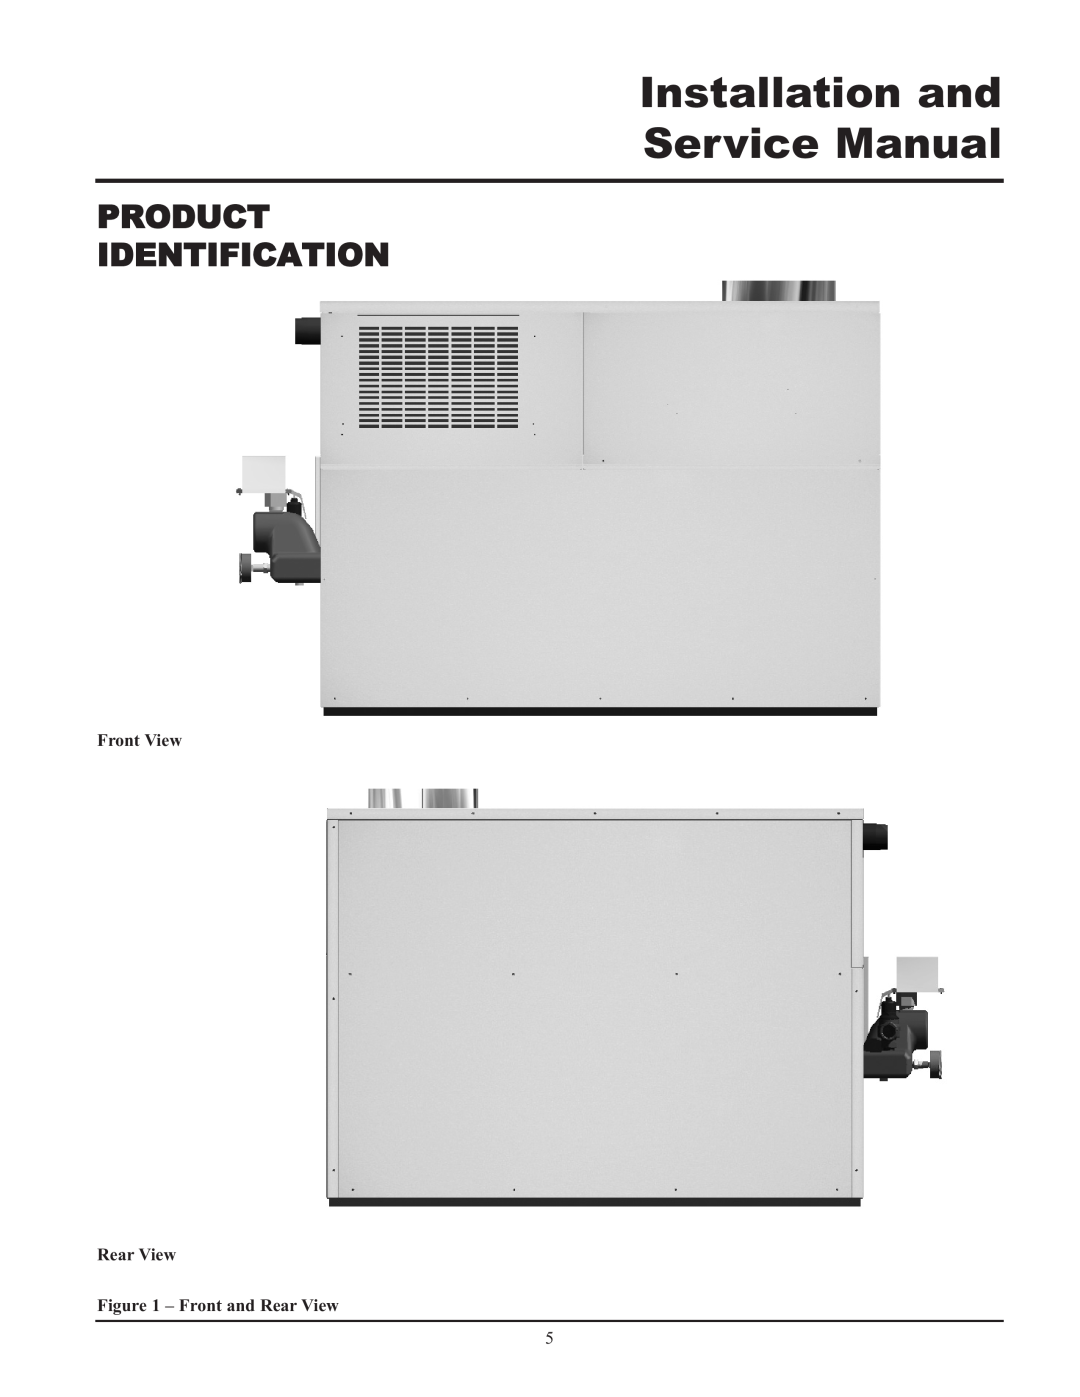 Lochinvar 000 - 2, 495, 065 service manual Product Identification, Front View Rear View, Front and Rear View 